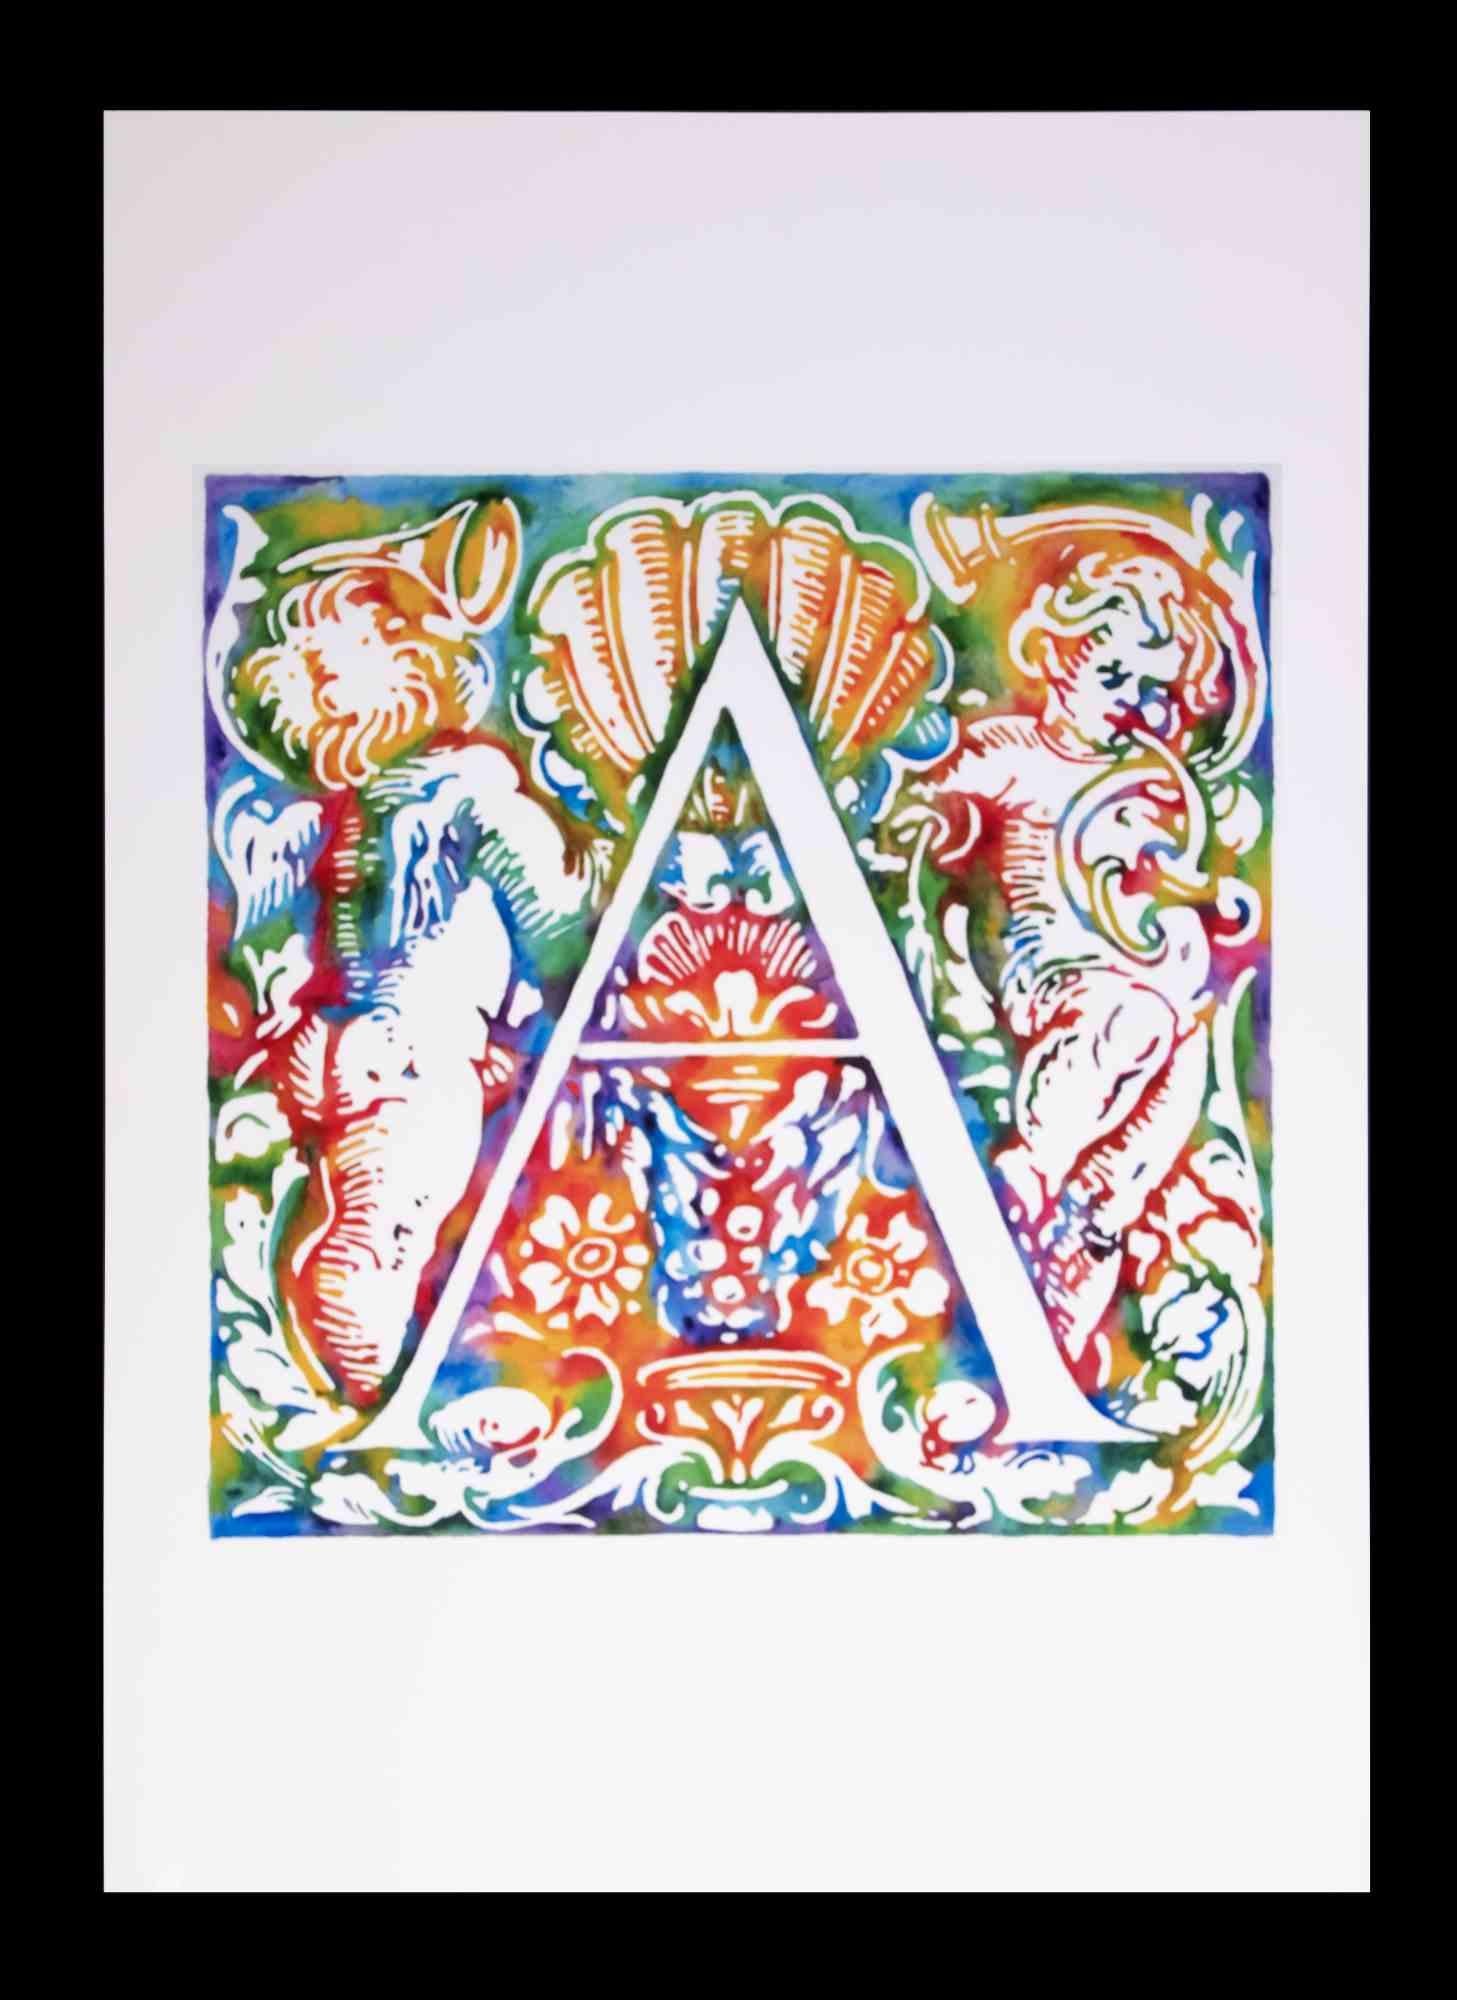 Letter A - Drawing by Simone Vaulpré - Late 20th century